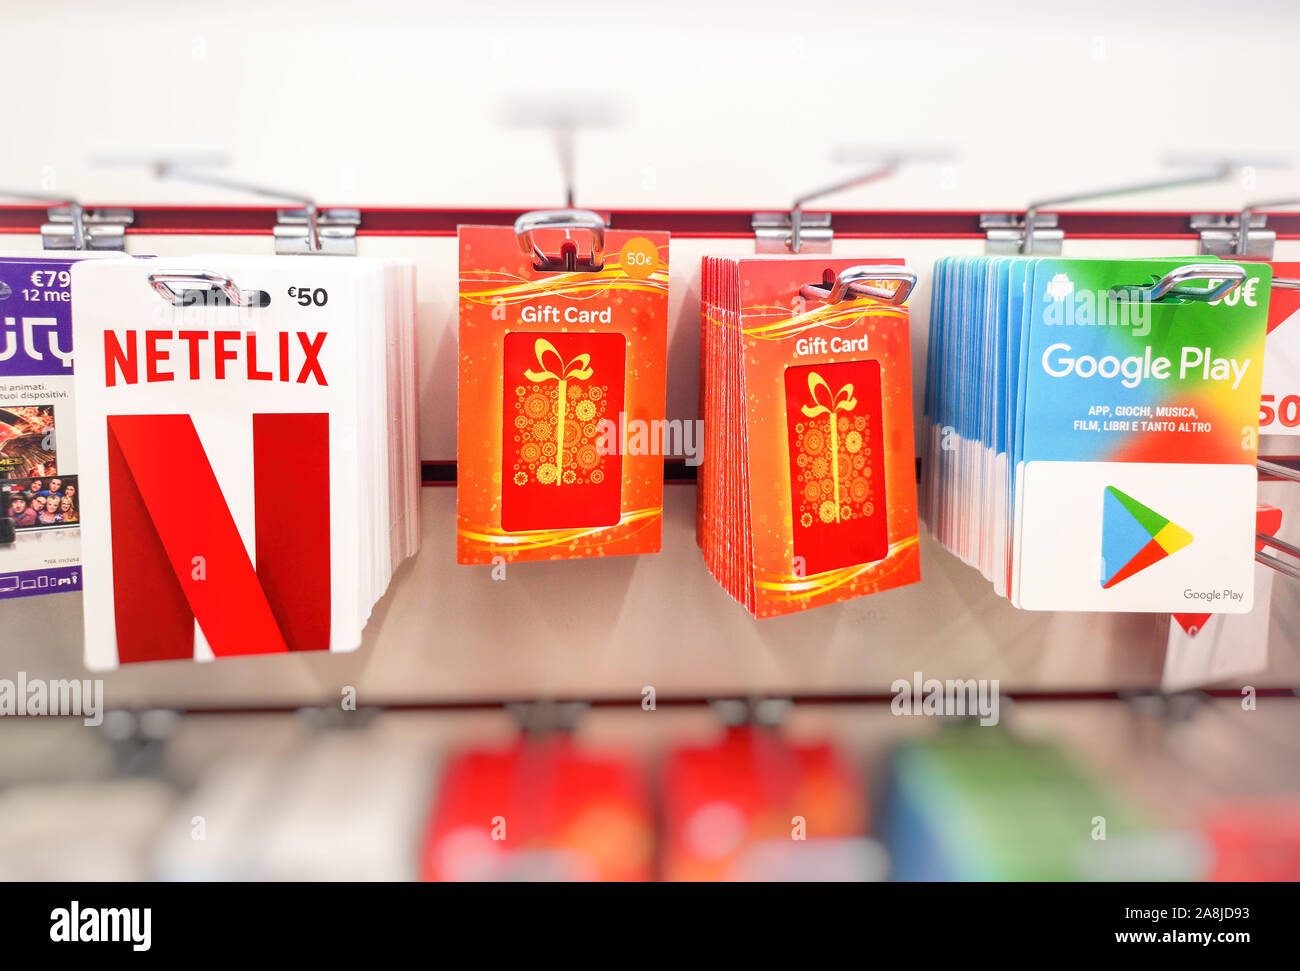 gift cards netflix subscriptions online services Netflix Google Play store Stock Photo